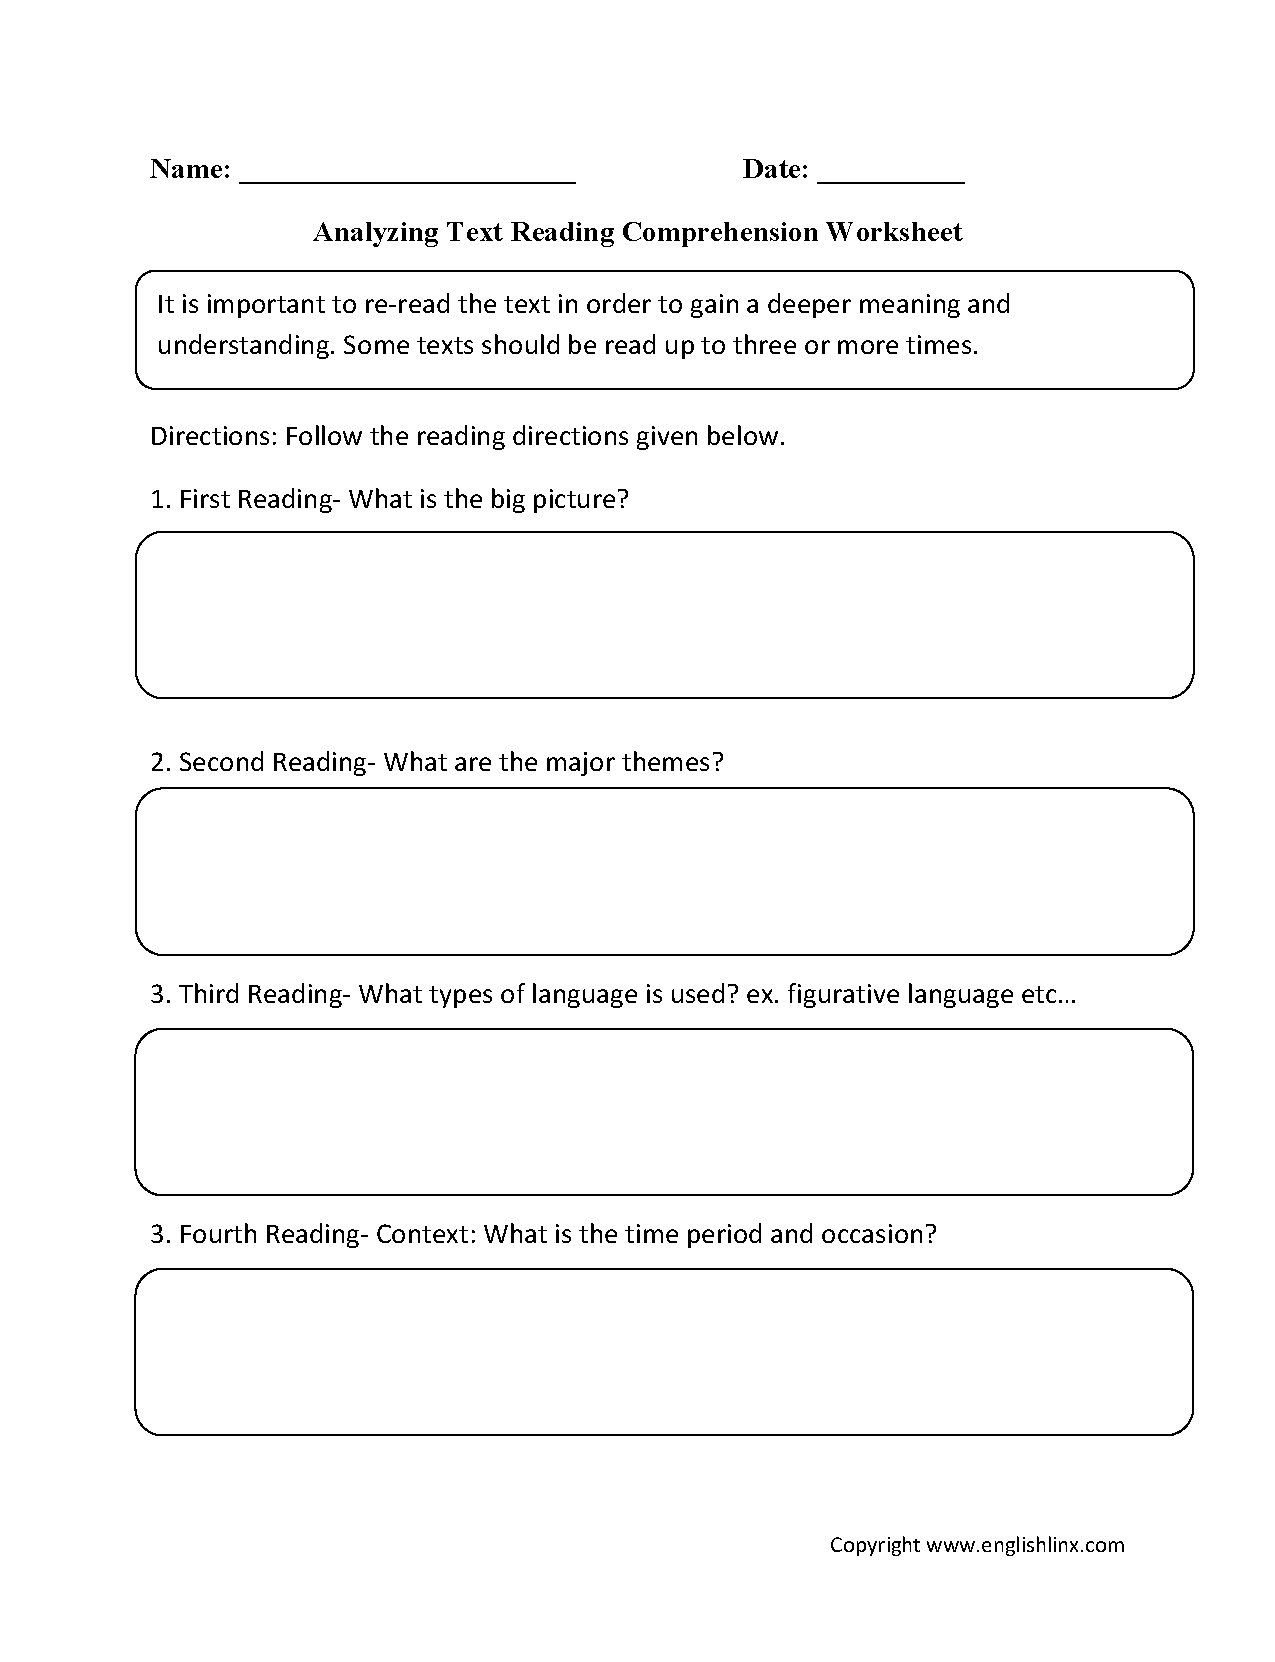 Reading Comprehension Worksheets | Analyzing Text Reading Comprehension